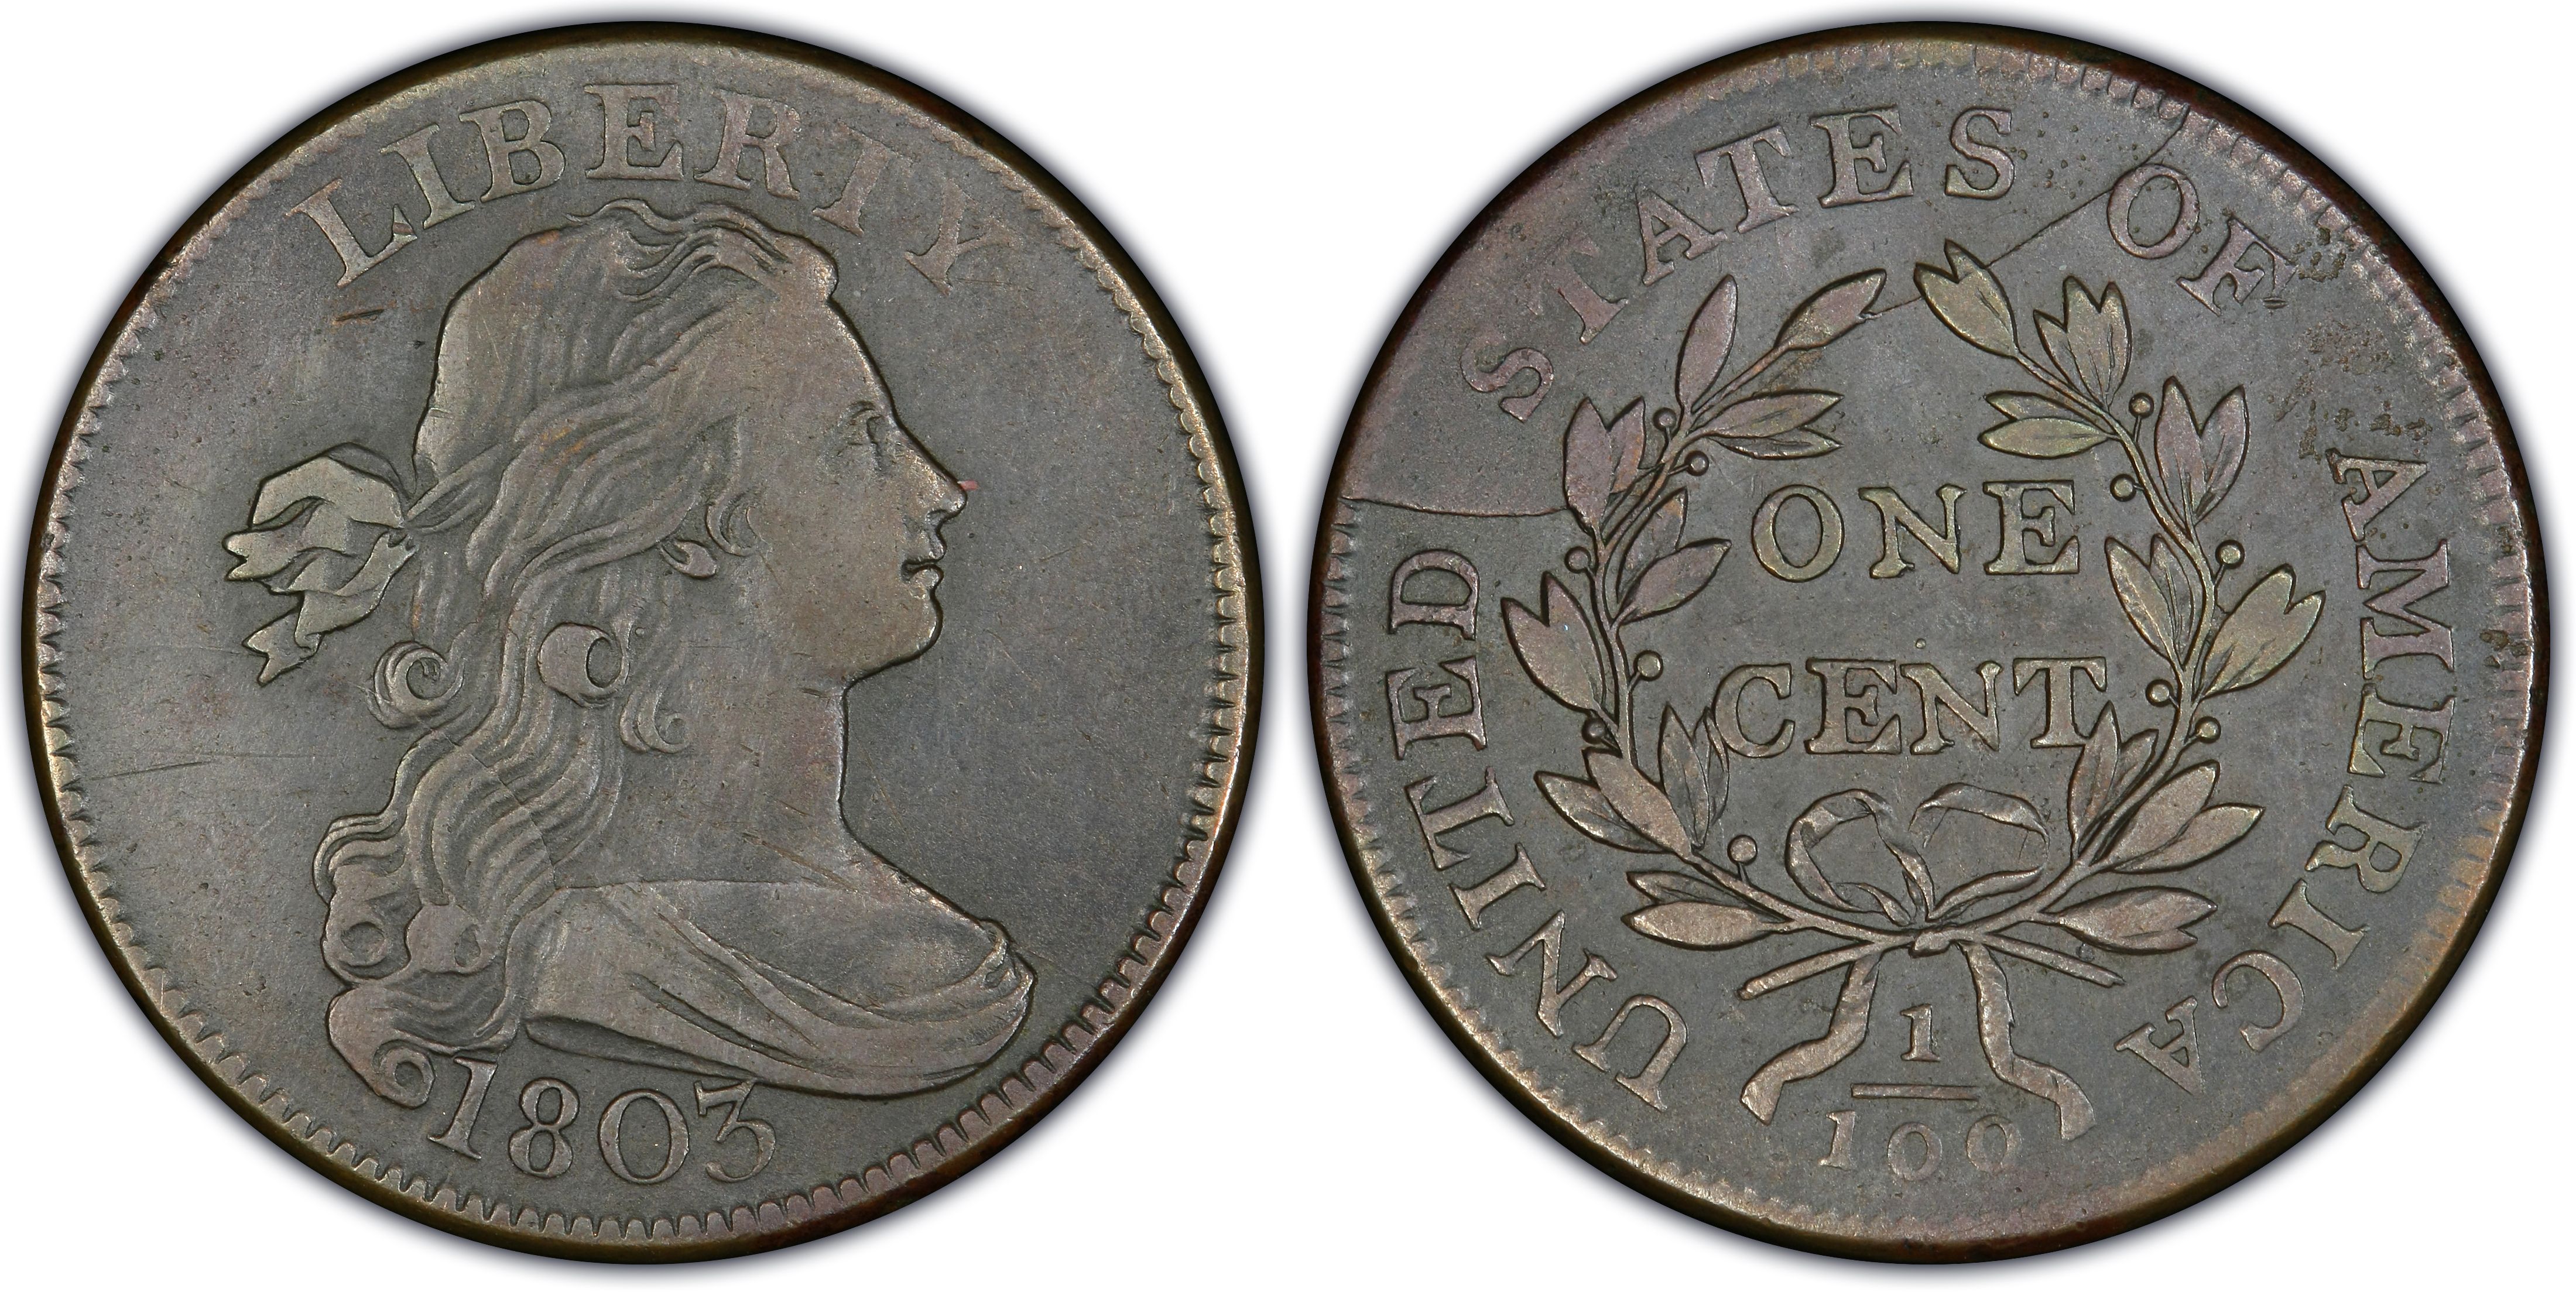 1803 1C Large Date, Small Fraction, BN (Regular Strike) Draped Bust Cent -  PCGS CoinFacts